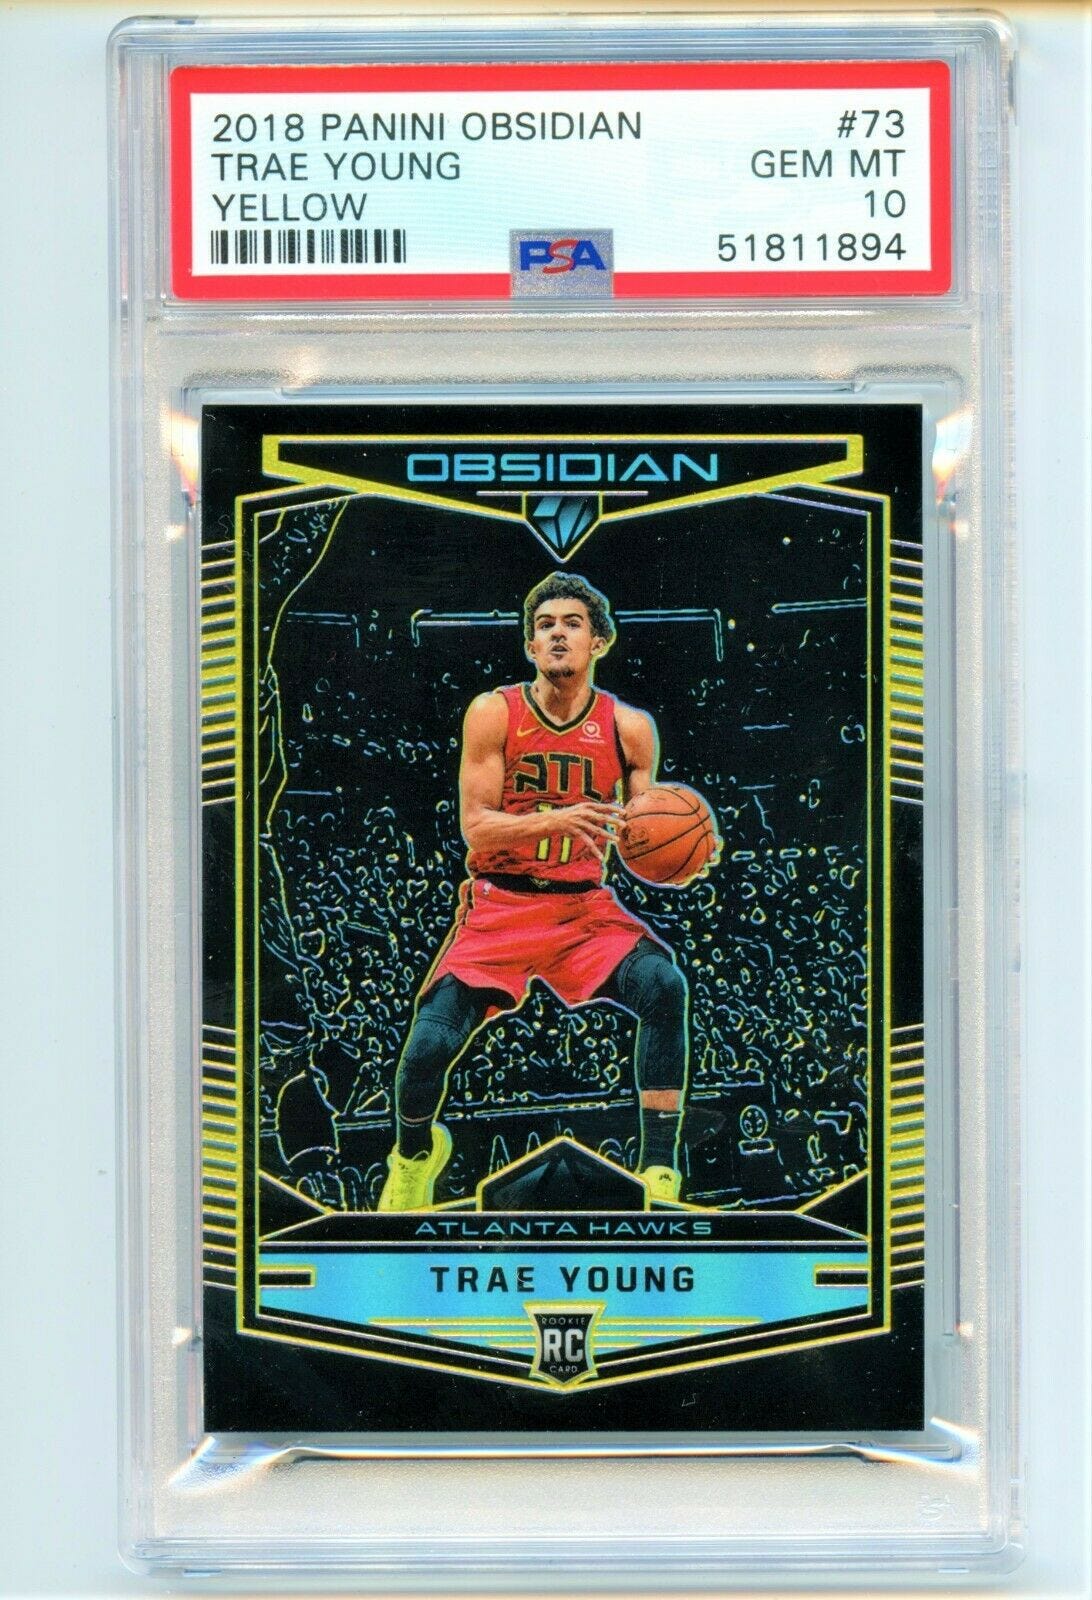 Image 1 - TRAE-YOUNG-RC-2018-19-PANINI-OBSIDIAN-YELLOW-PRIZM-ROOKIE-SP-10-PSA-10-GEM-MINT